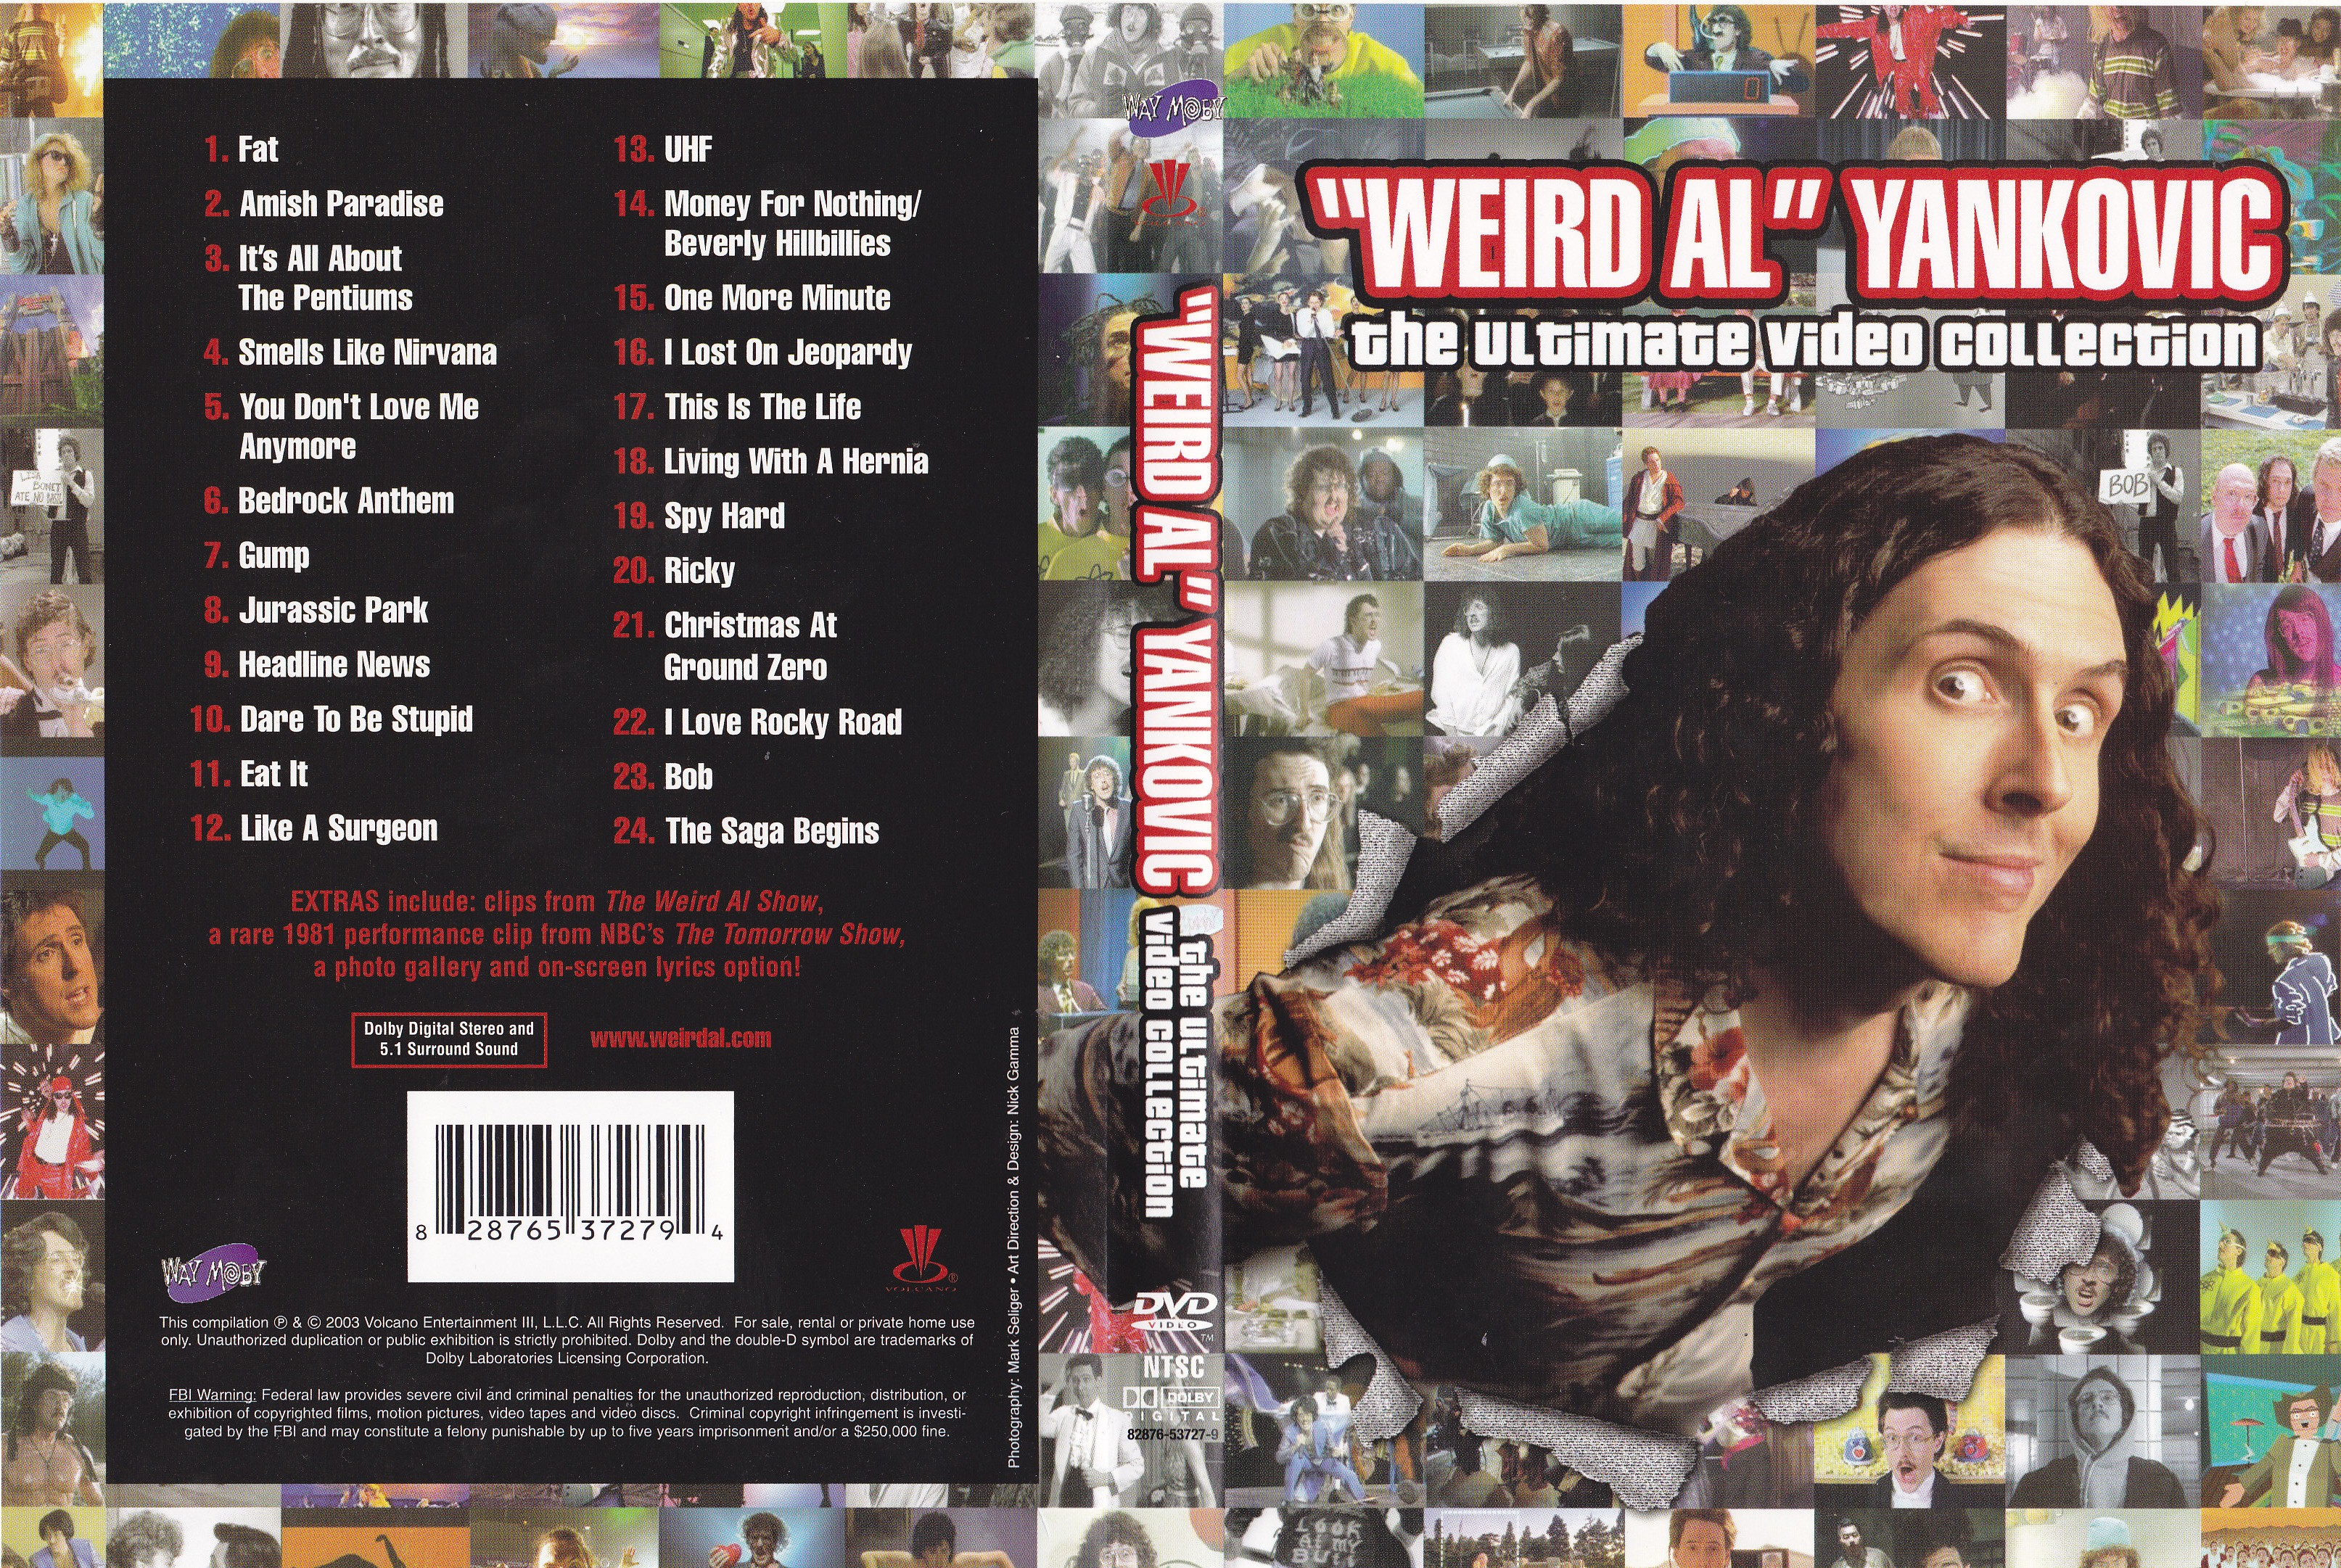 Jaquette DVD Weird Al Ynakovic - The ultimate video collection